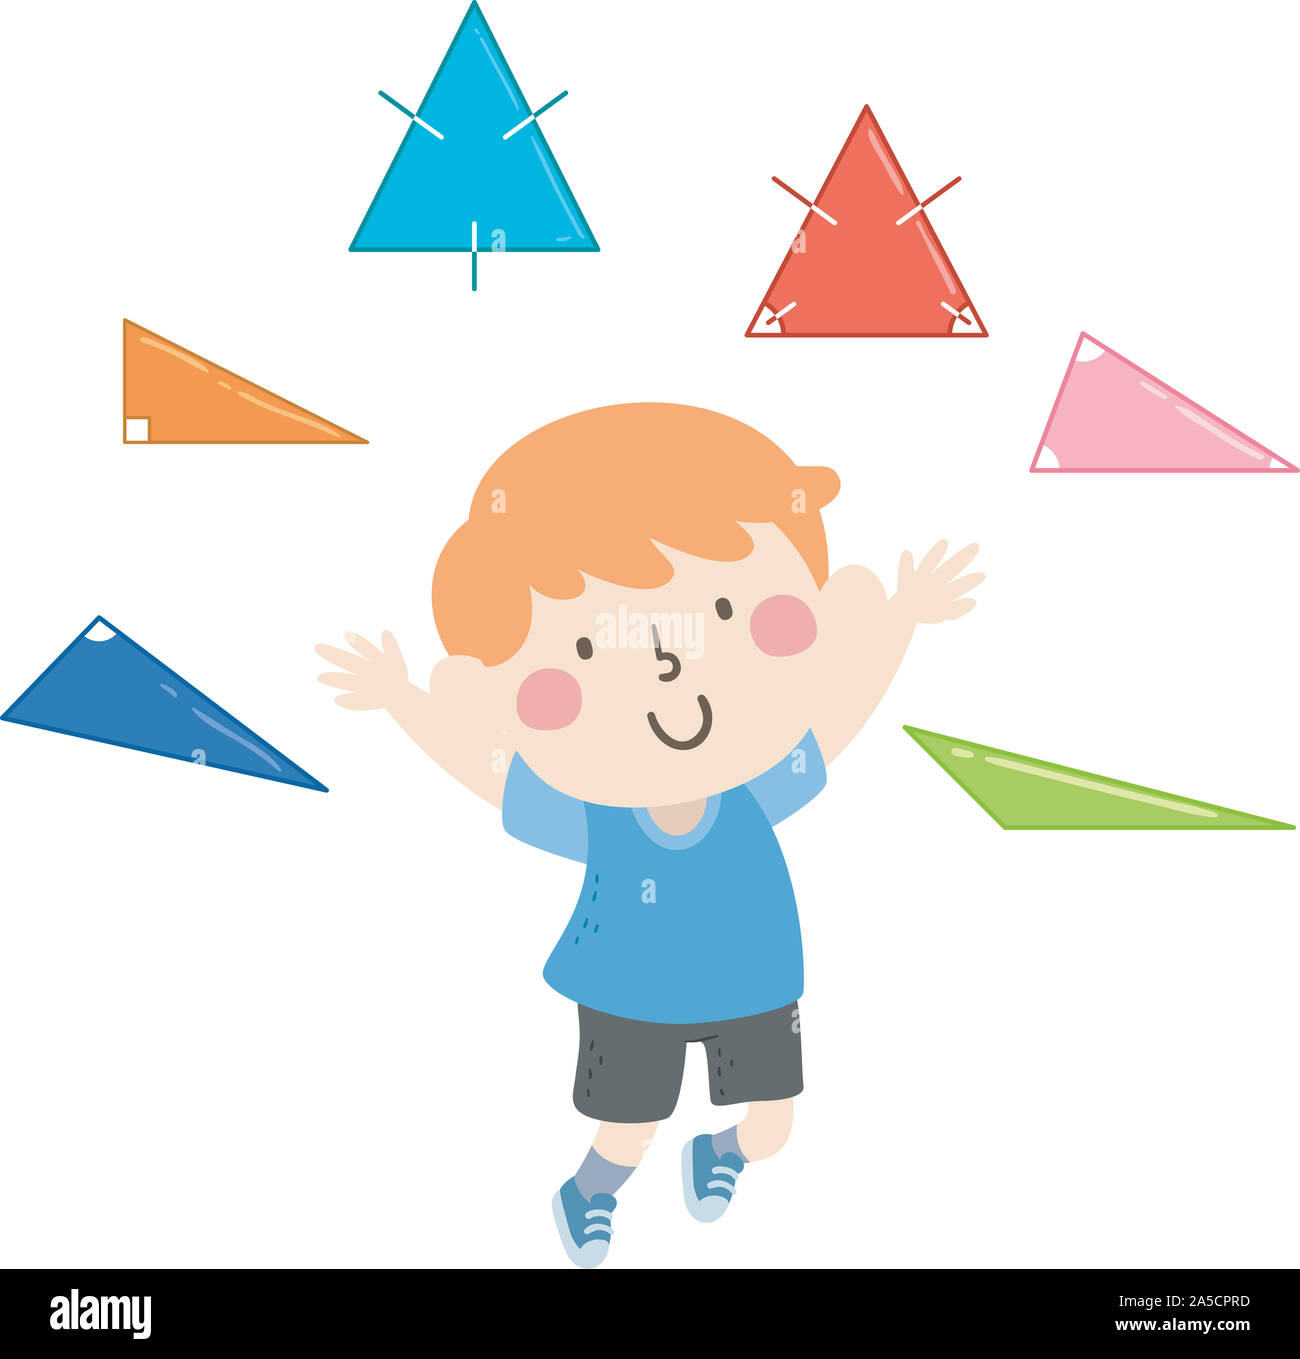 Types of triangles Cut Out Stock Images & Pictures - Alamy